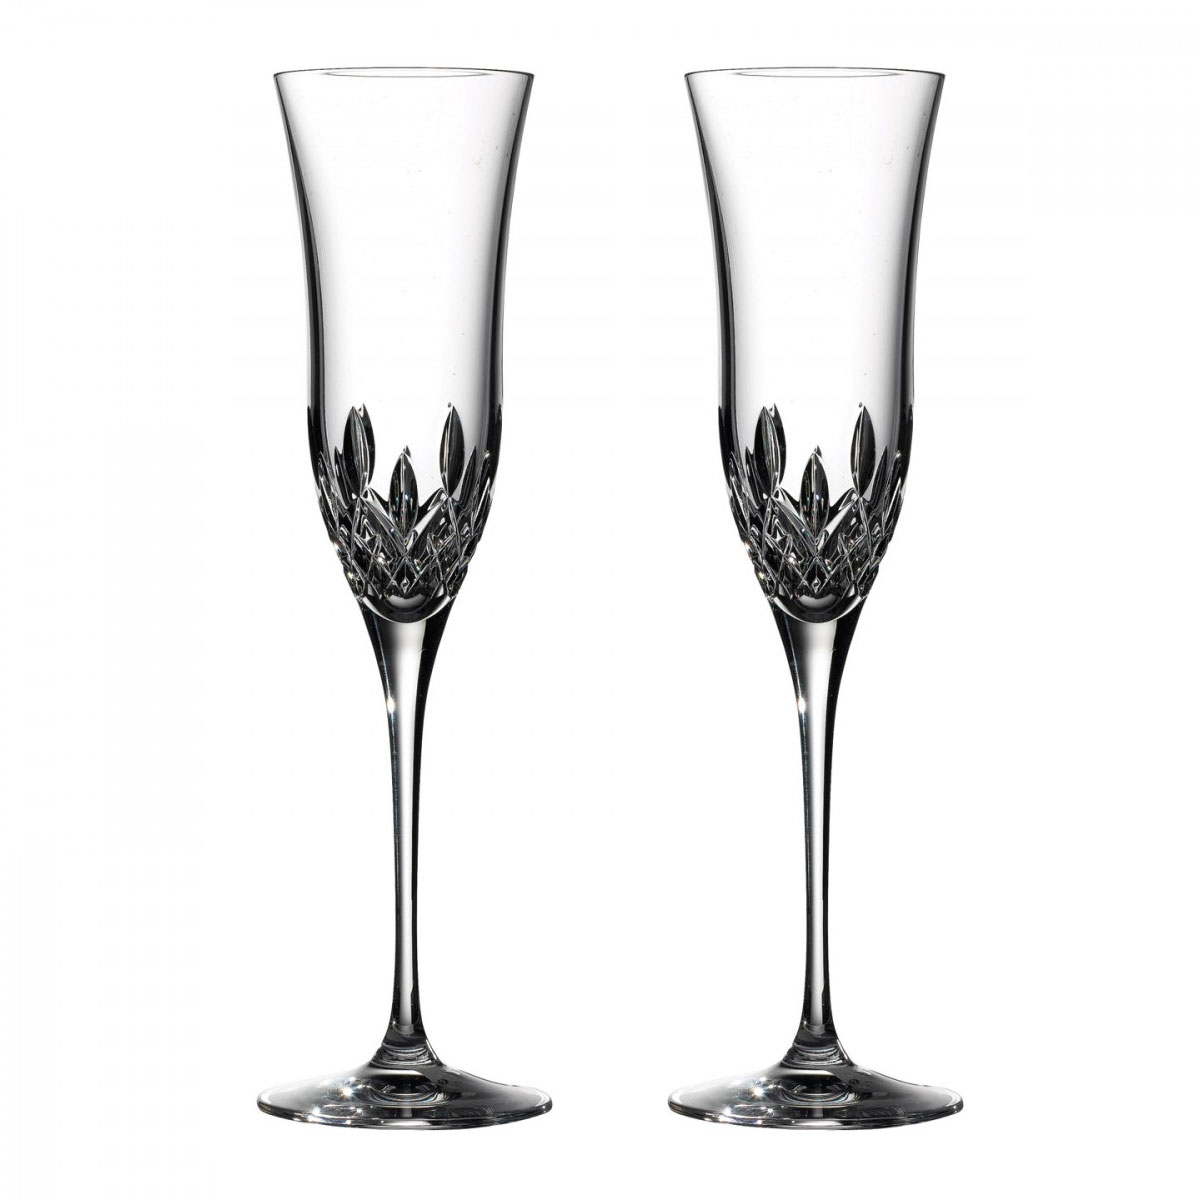 Waterford Lismore Essence Toasting Flutes, Pair